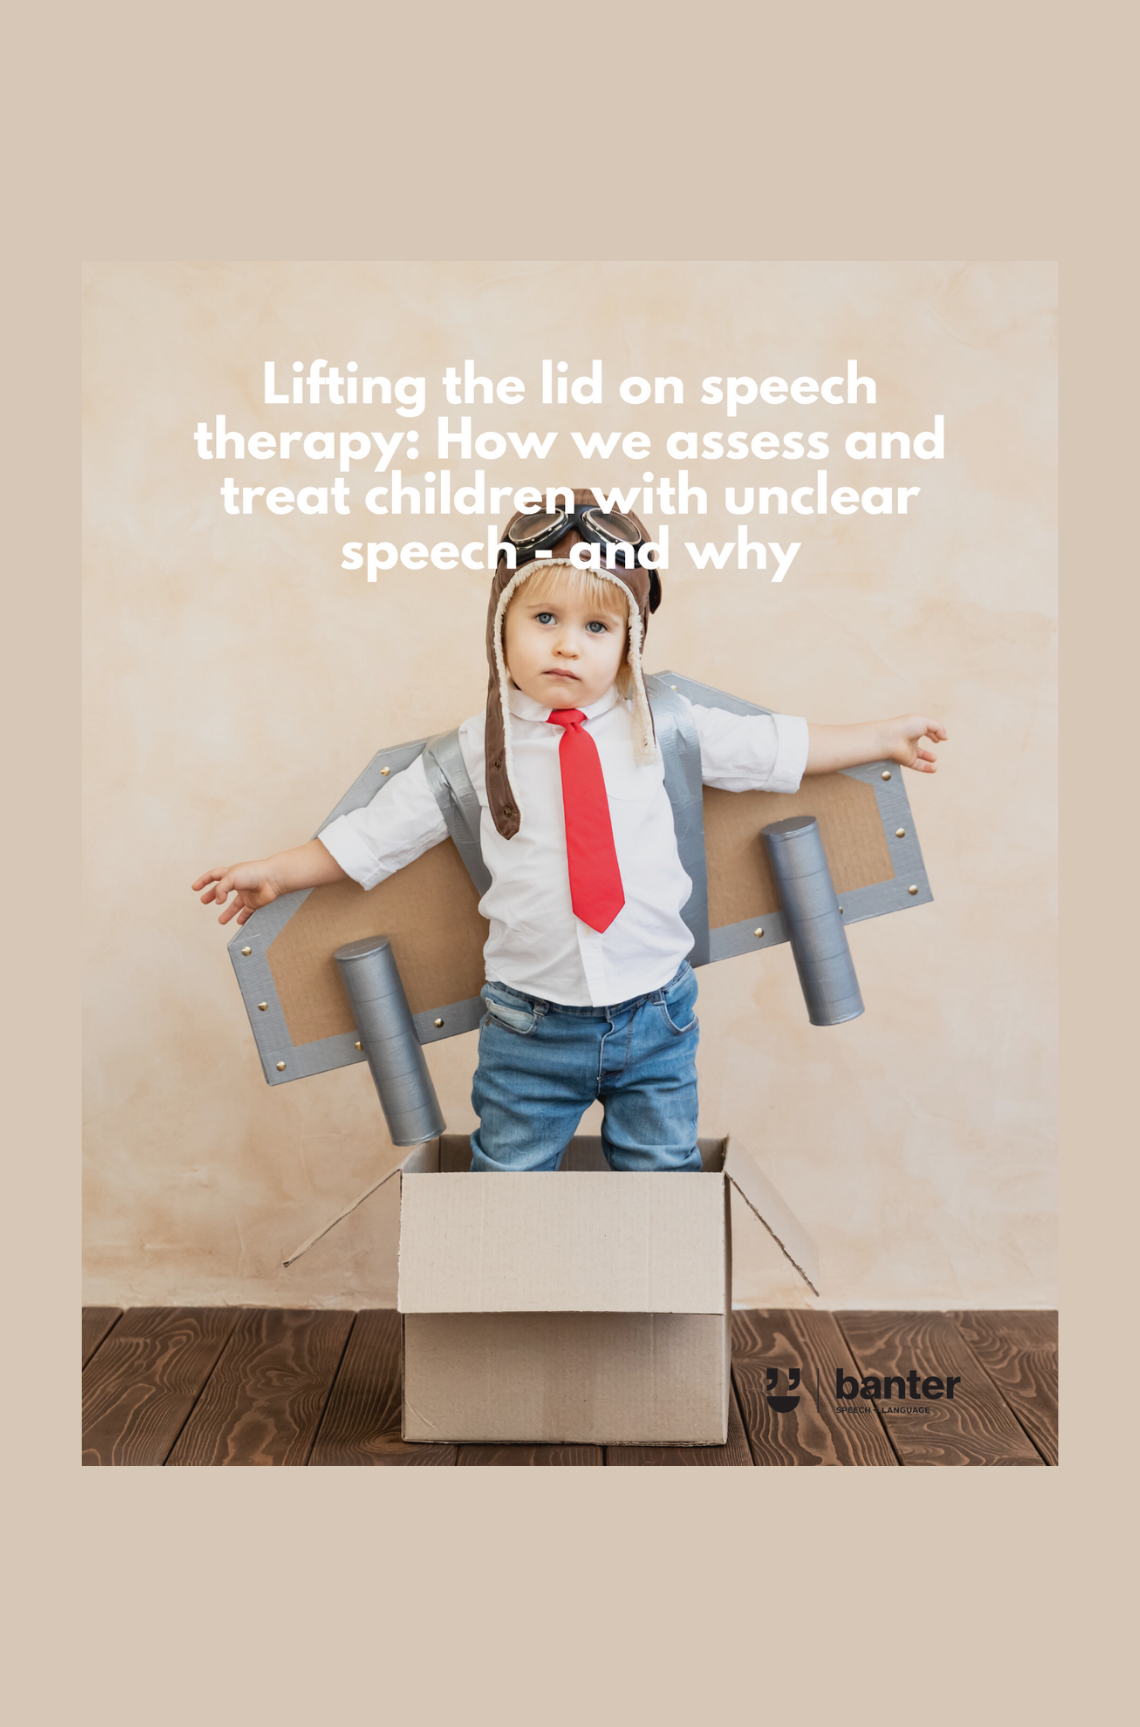 Lifting the lid on speech therapy how we assess and treat children with unclear speech - and why